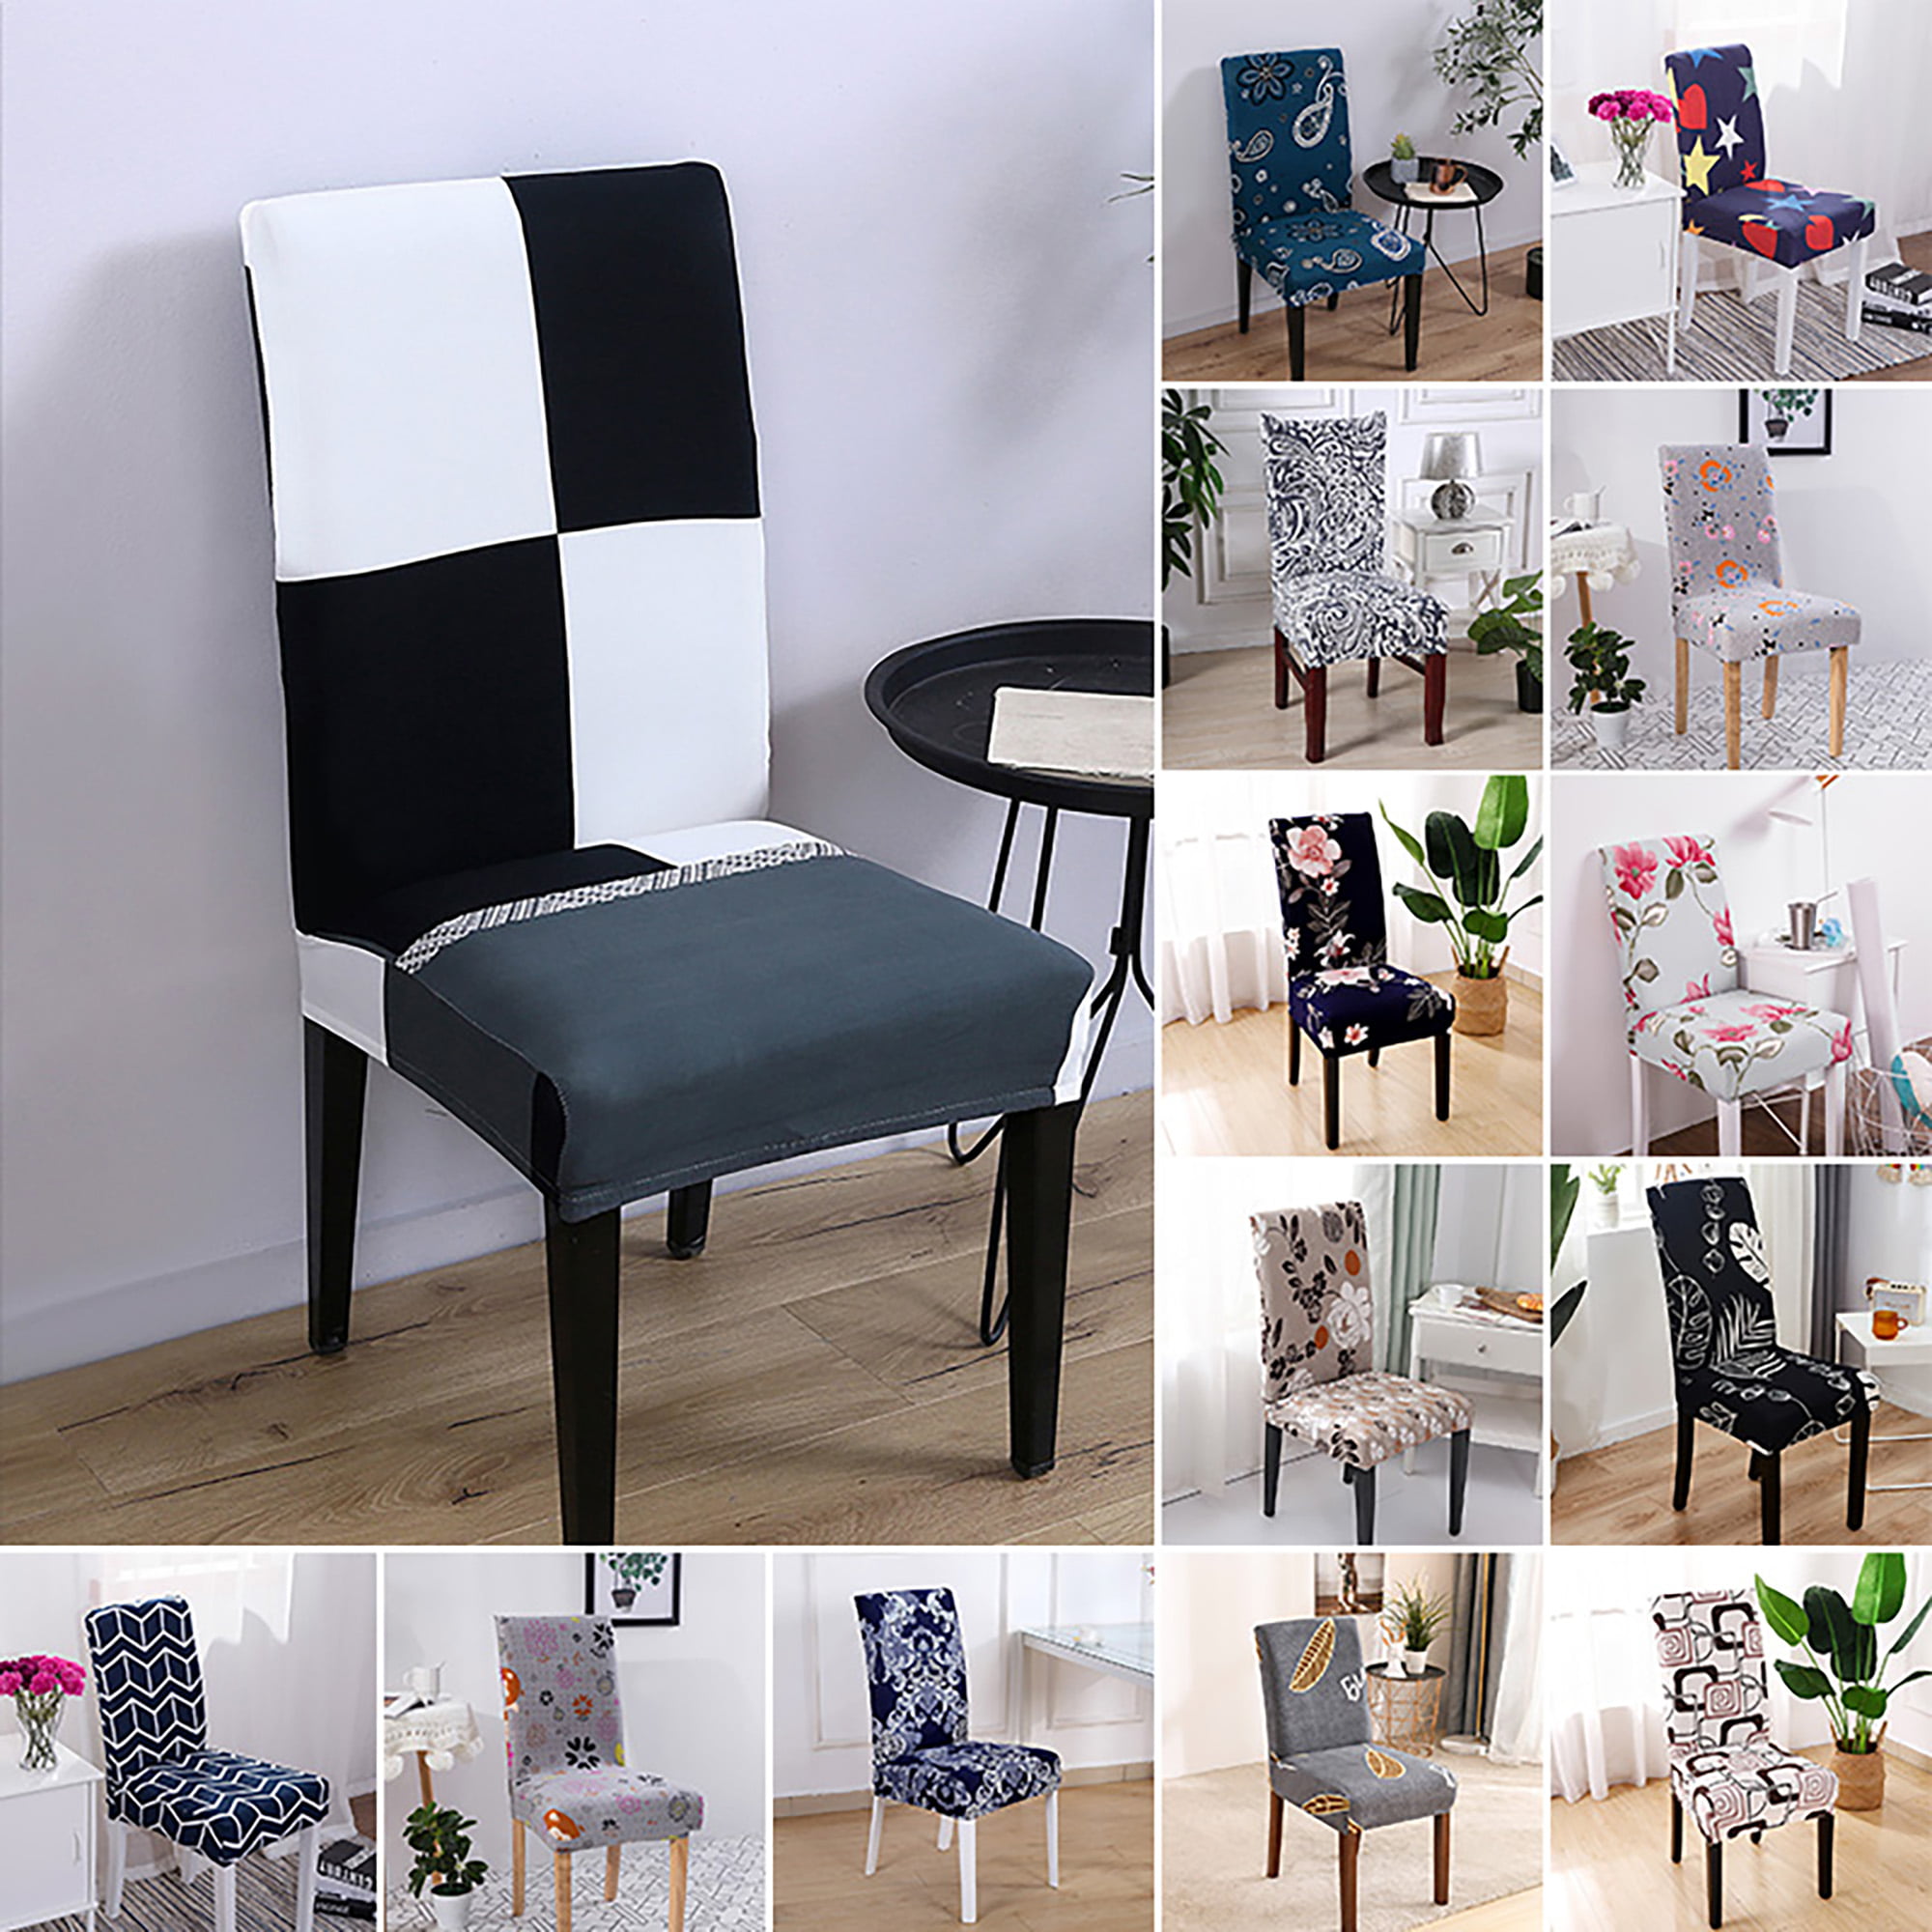 Details about   1/4/6pcs Stretch Spandex Dining Room Chair Covers Seat Slipcovers Home Decor USA 